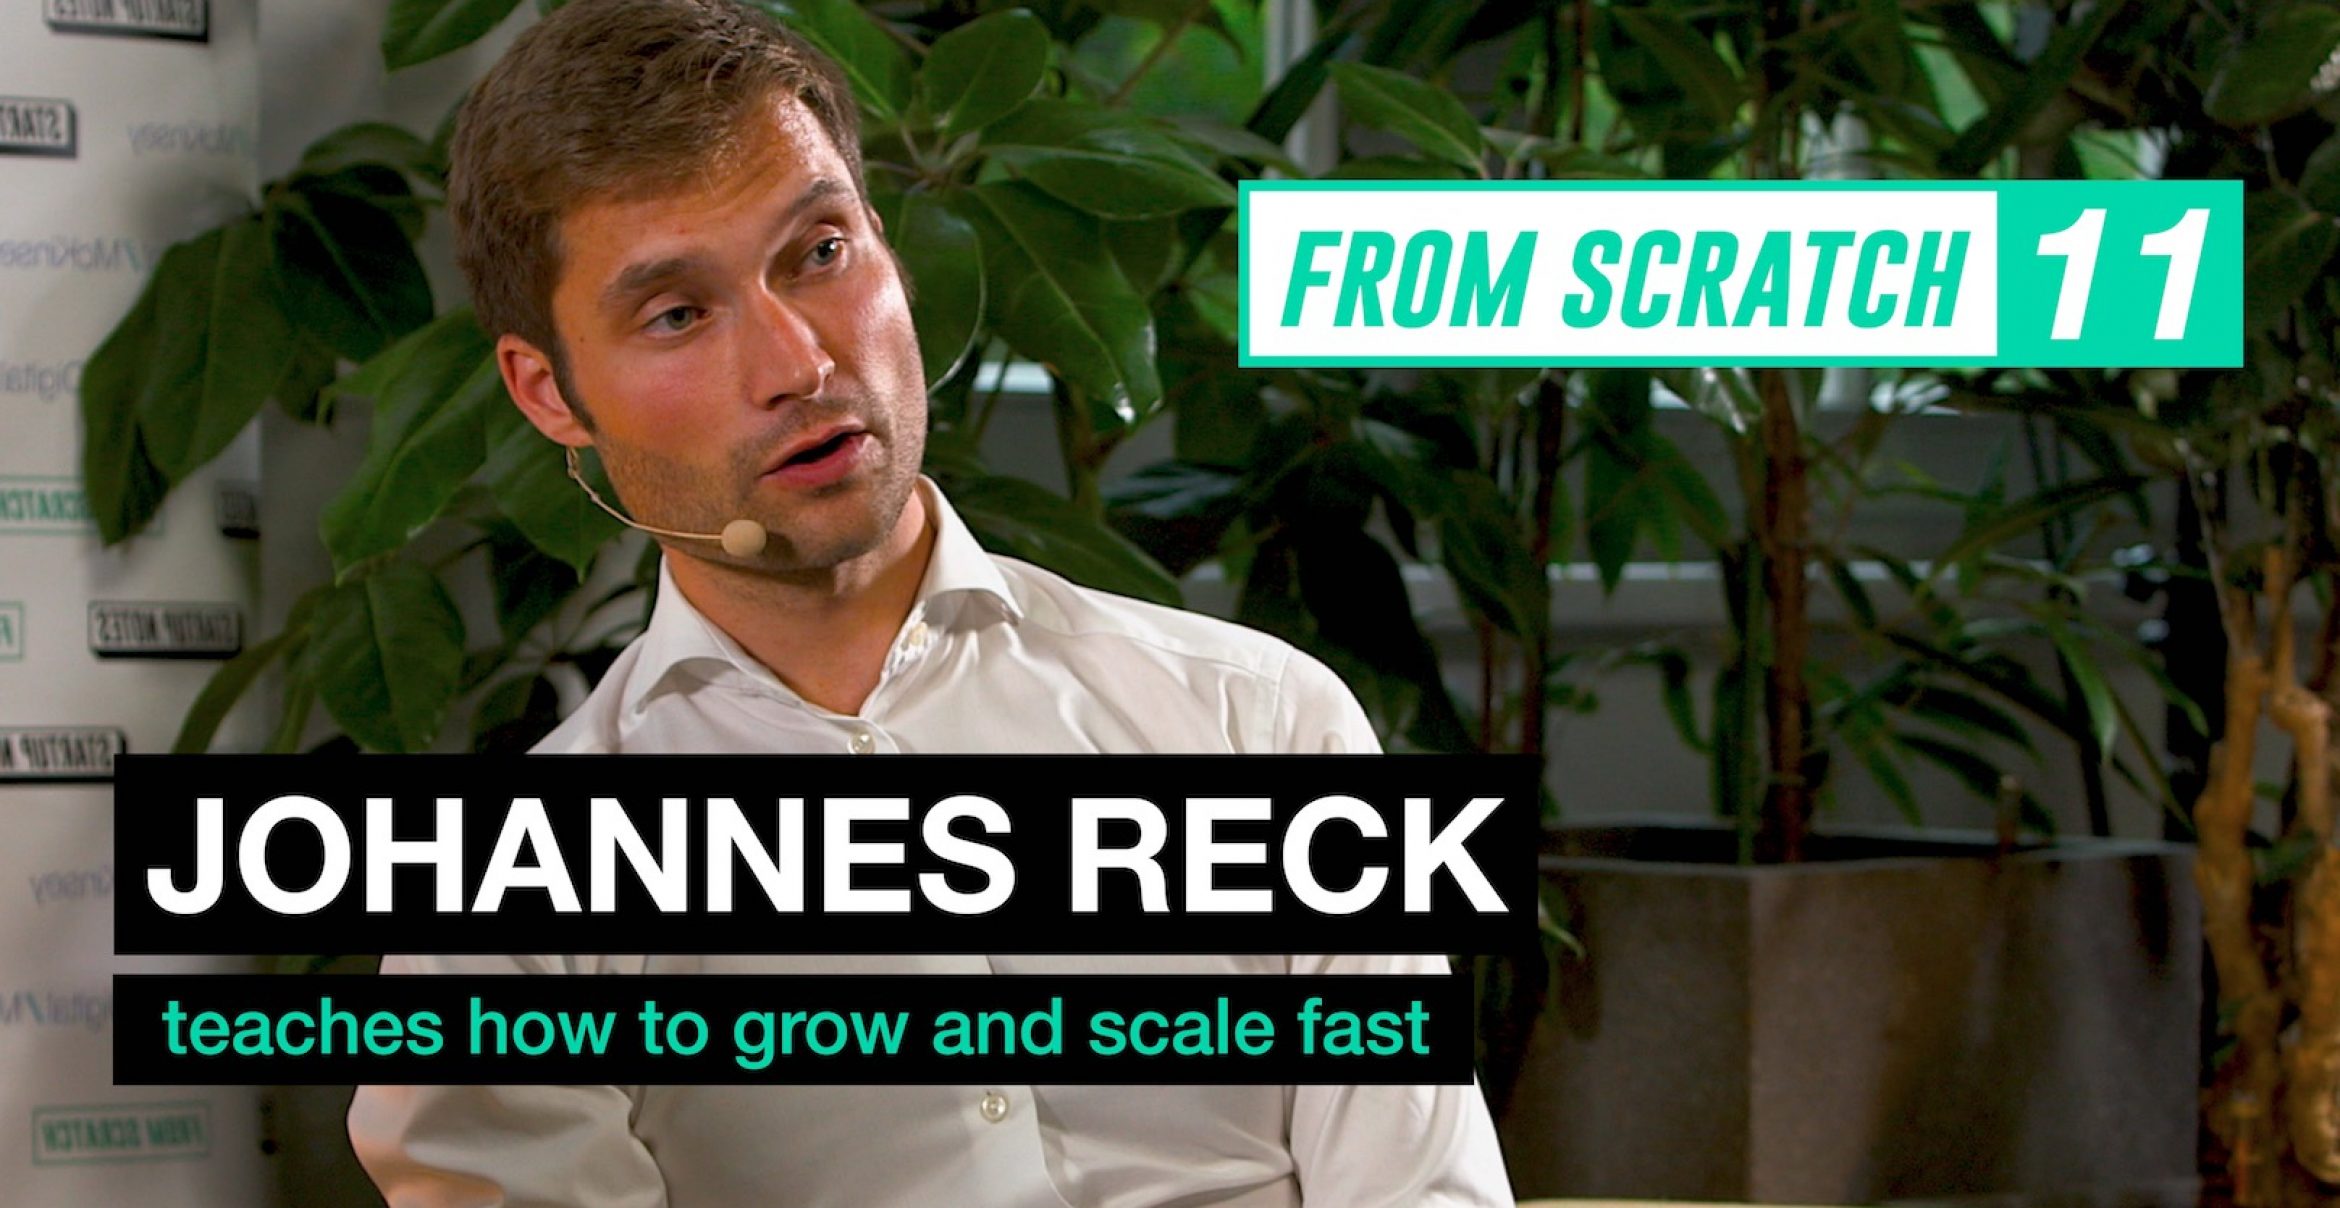 From Scratch #11: Johannes Reck (GetYourGuide) über Growth